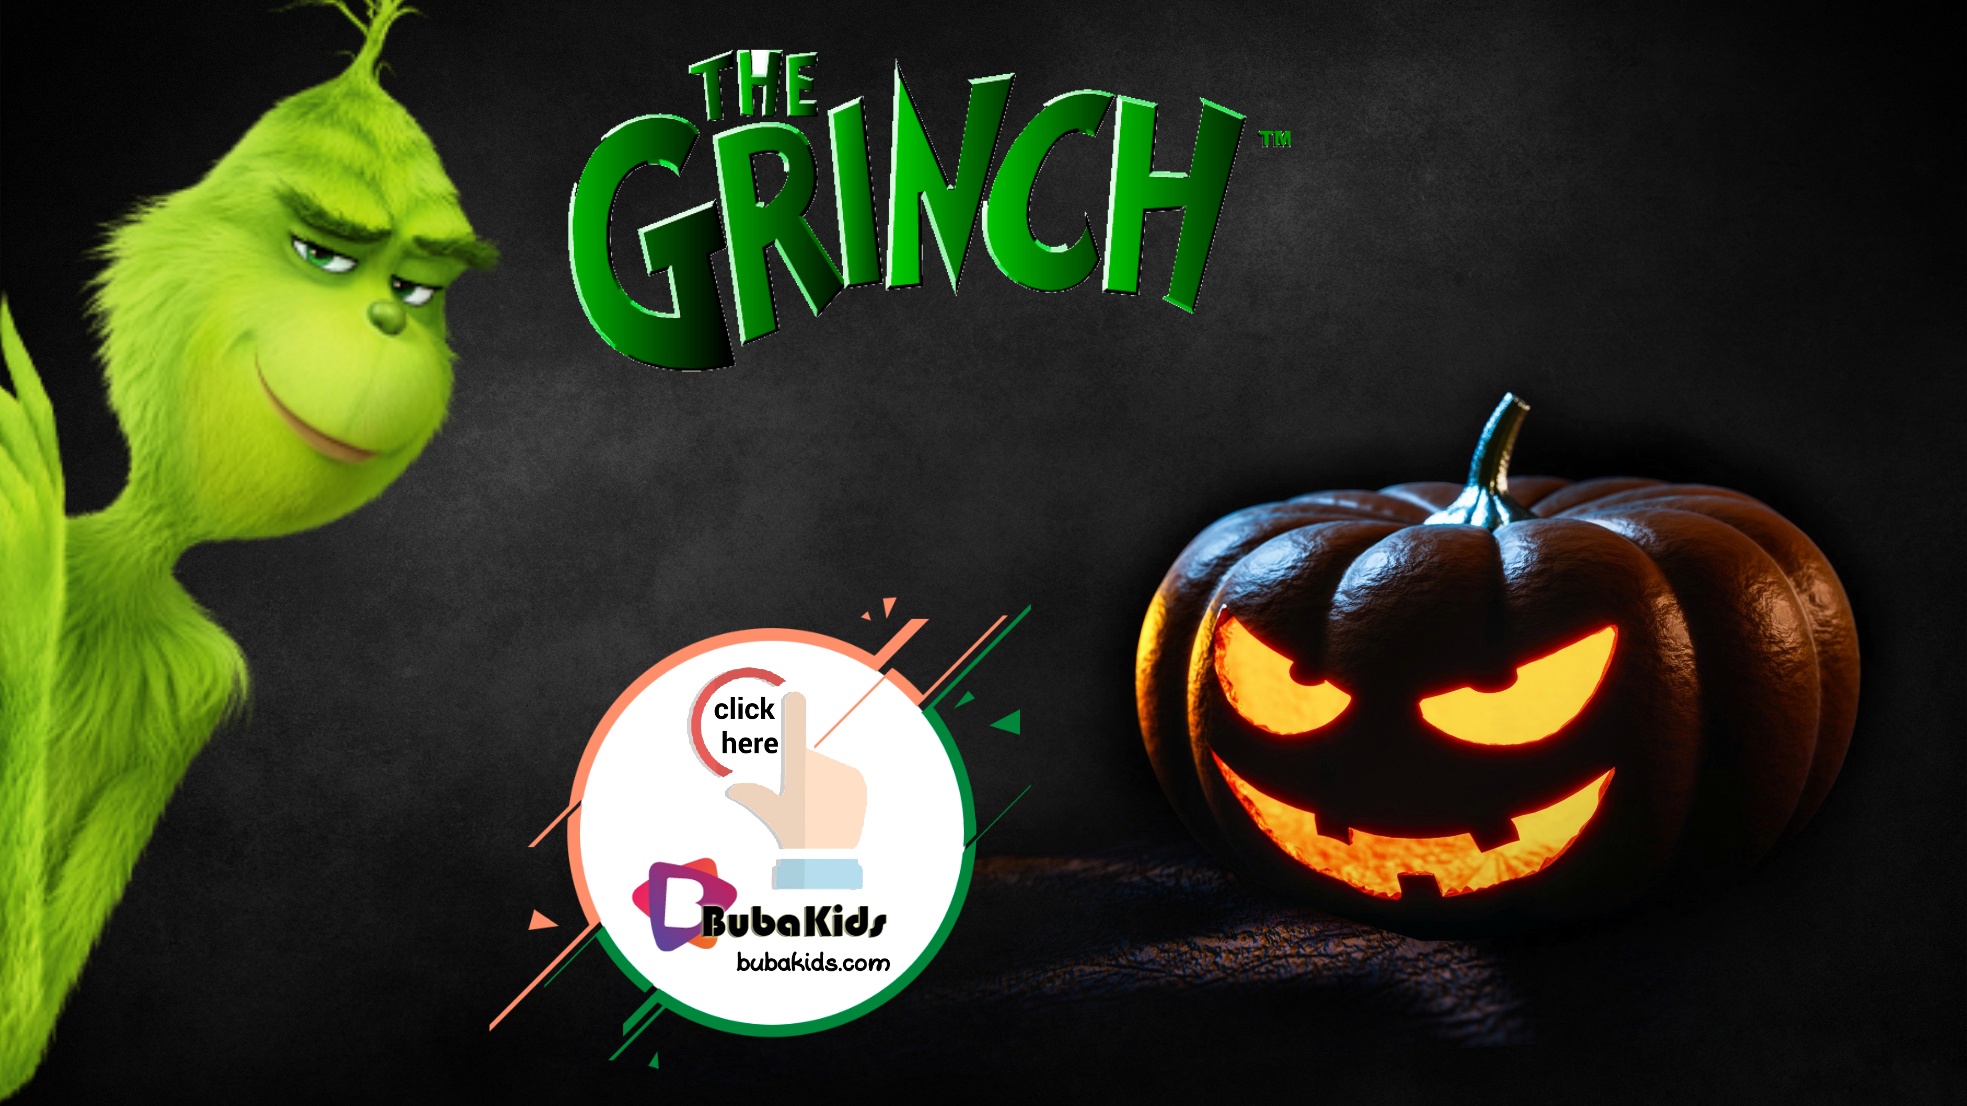 The grinch halloween invitation template free printable. Wallpaper